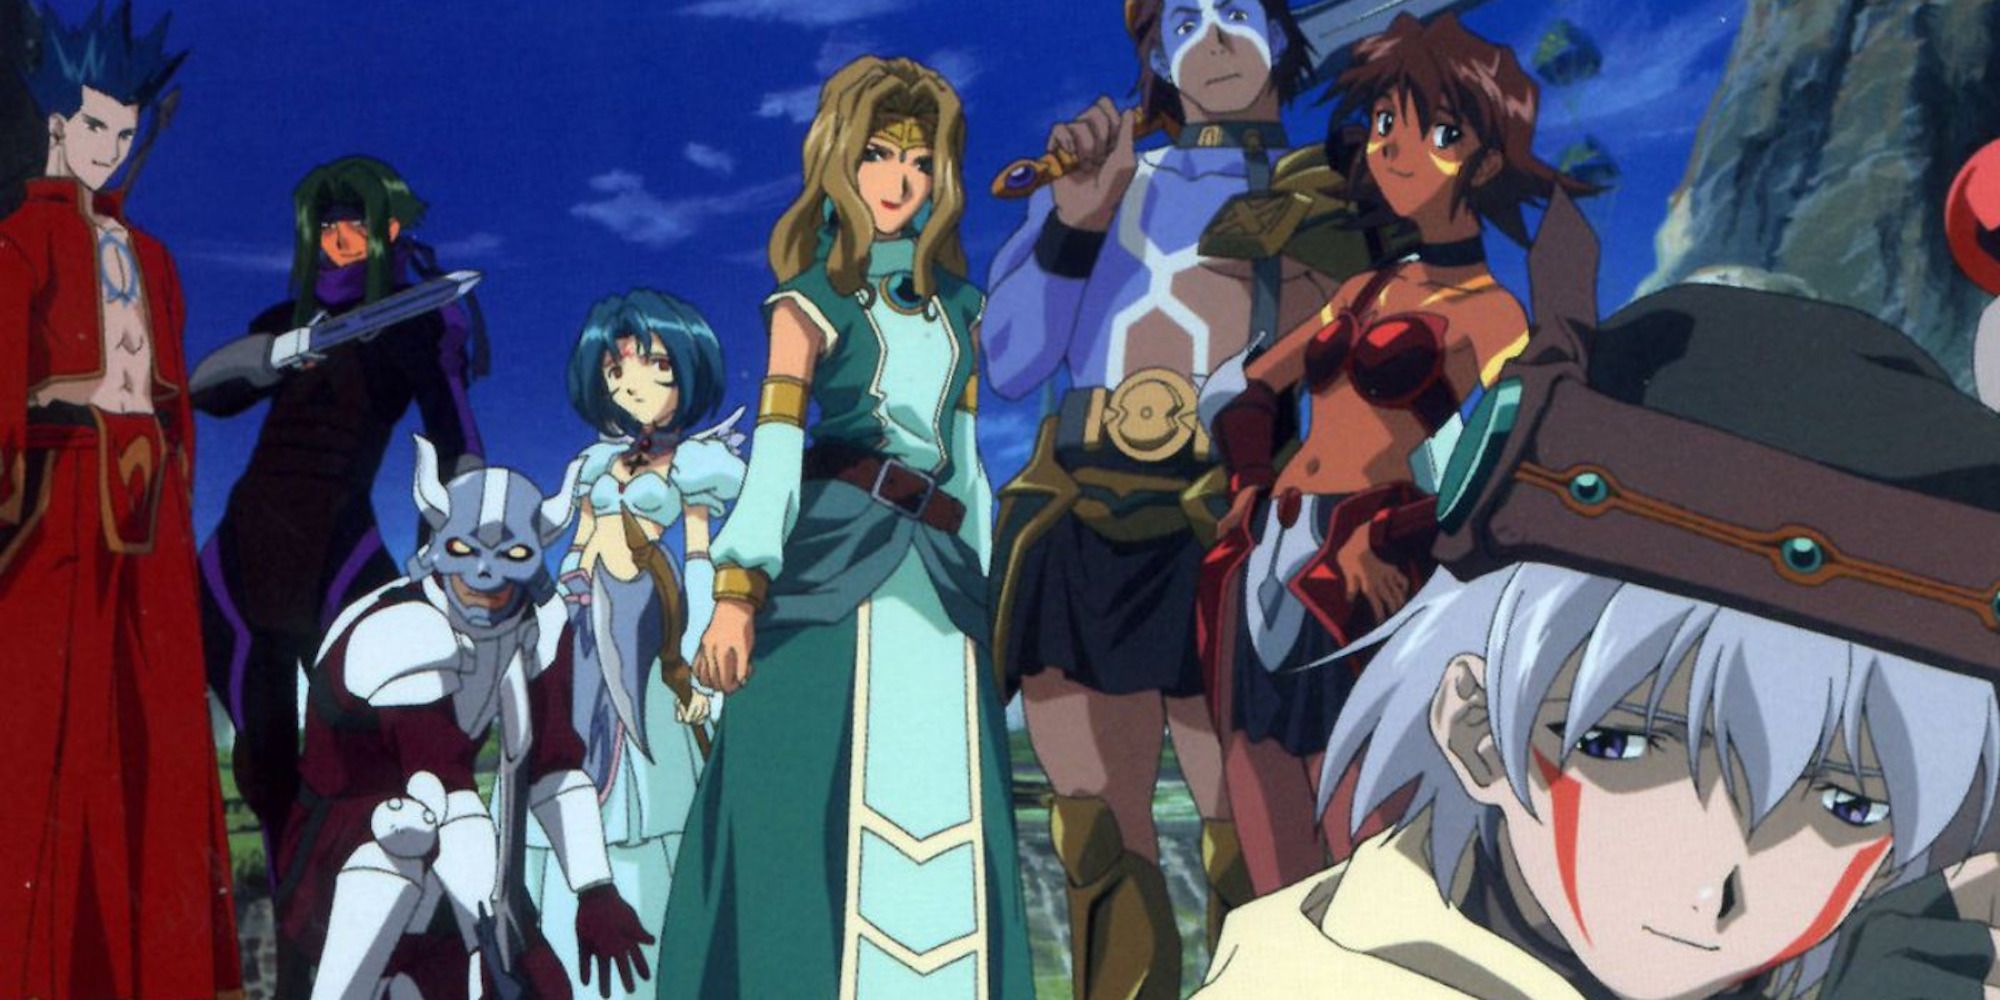 Promo art featuring characters from .hack//Sign